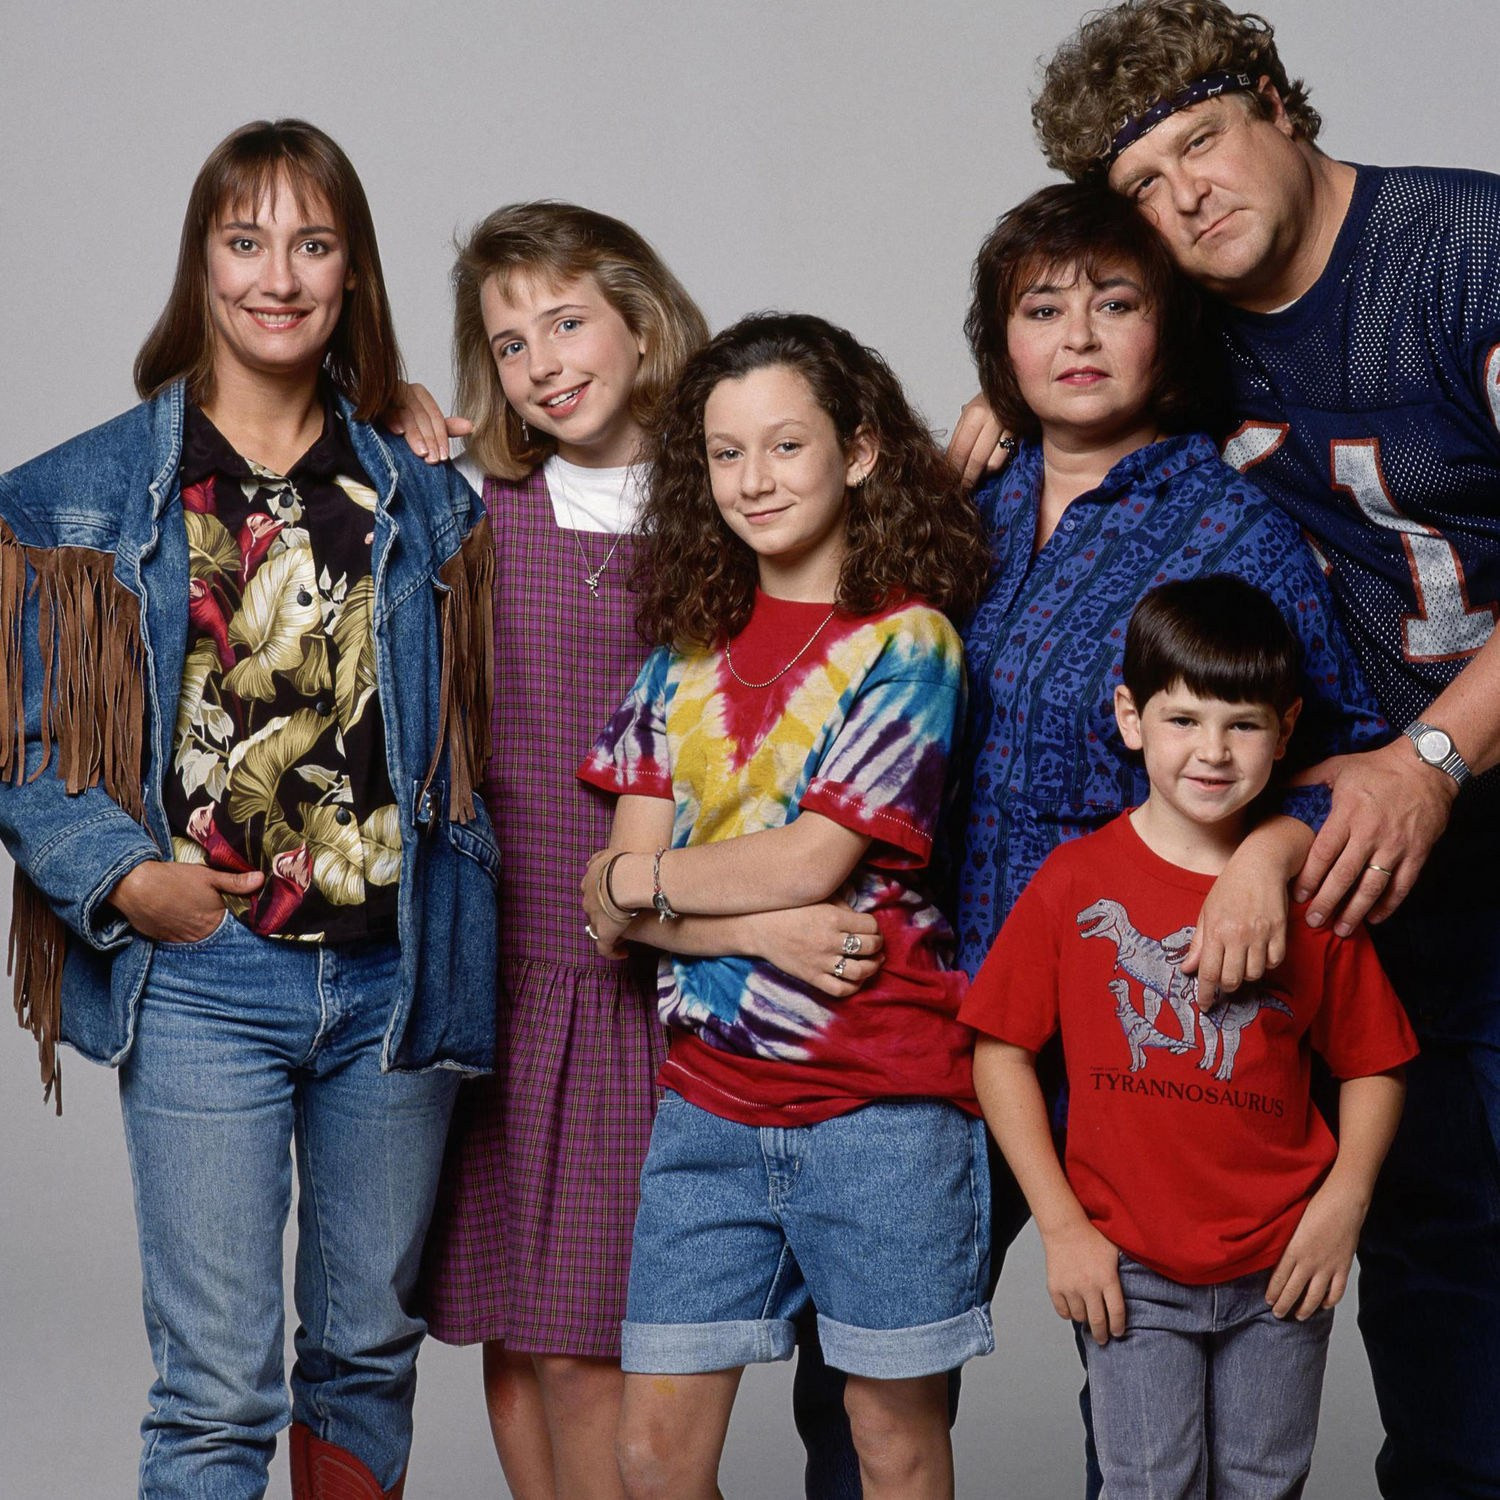 90S Fashion For Kids
 Jackie From Roseanne Is the Latest Unexpected—and Awesome